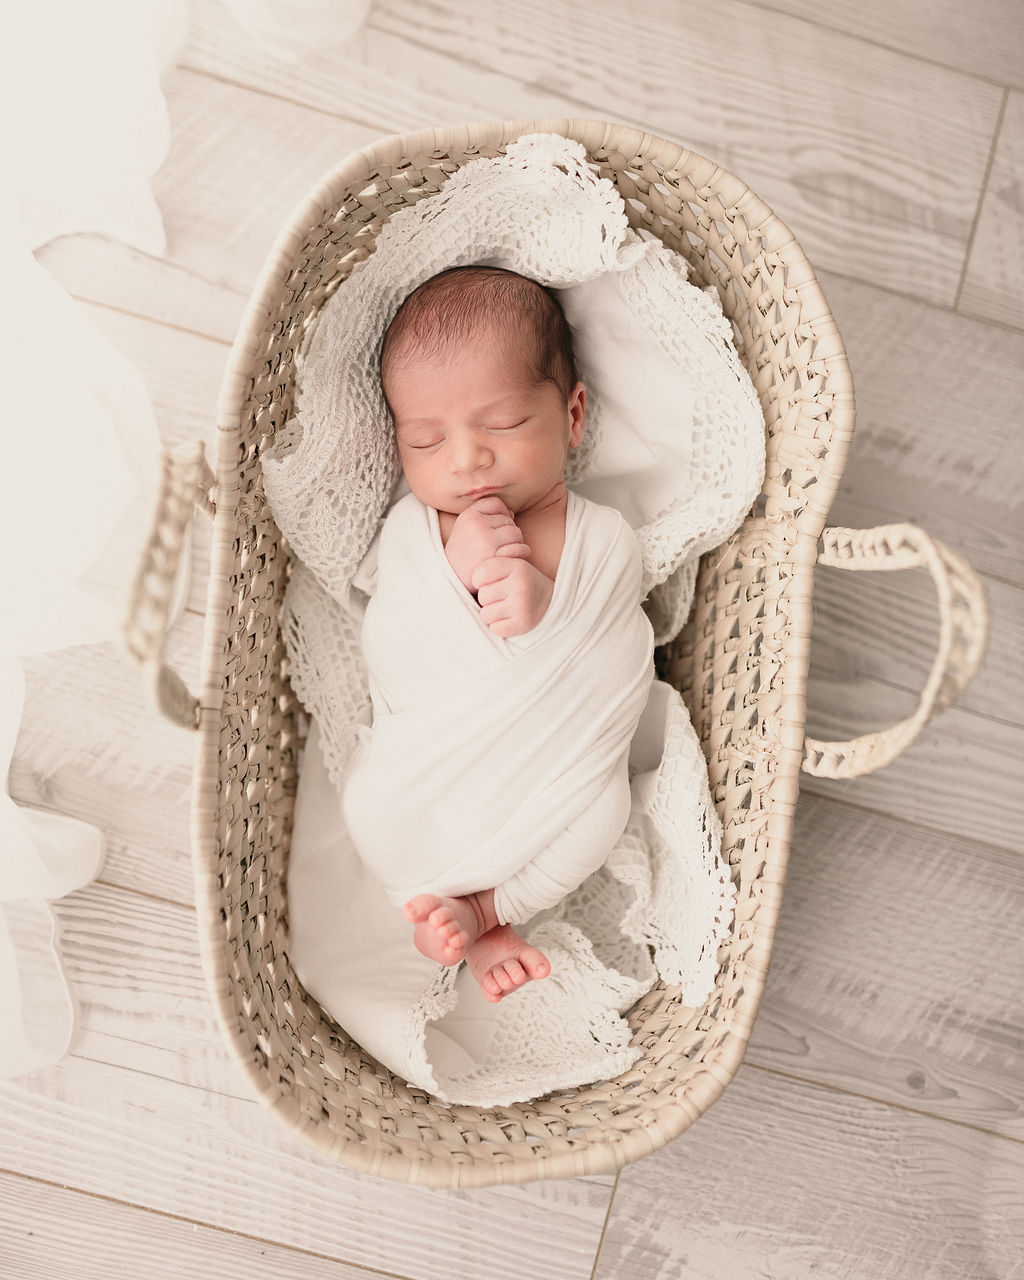 Newborn baby wrapped in cream laying in a woven basket Dr. Cherry Klamath Falls